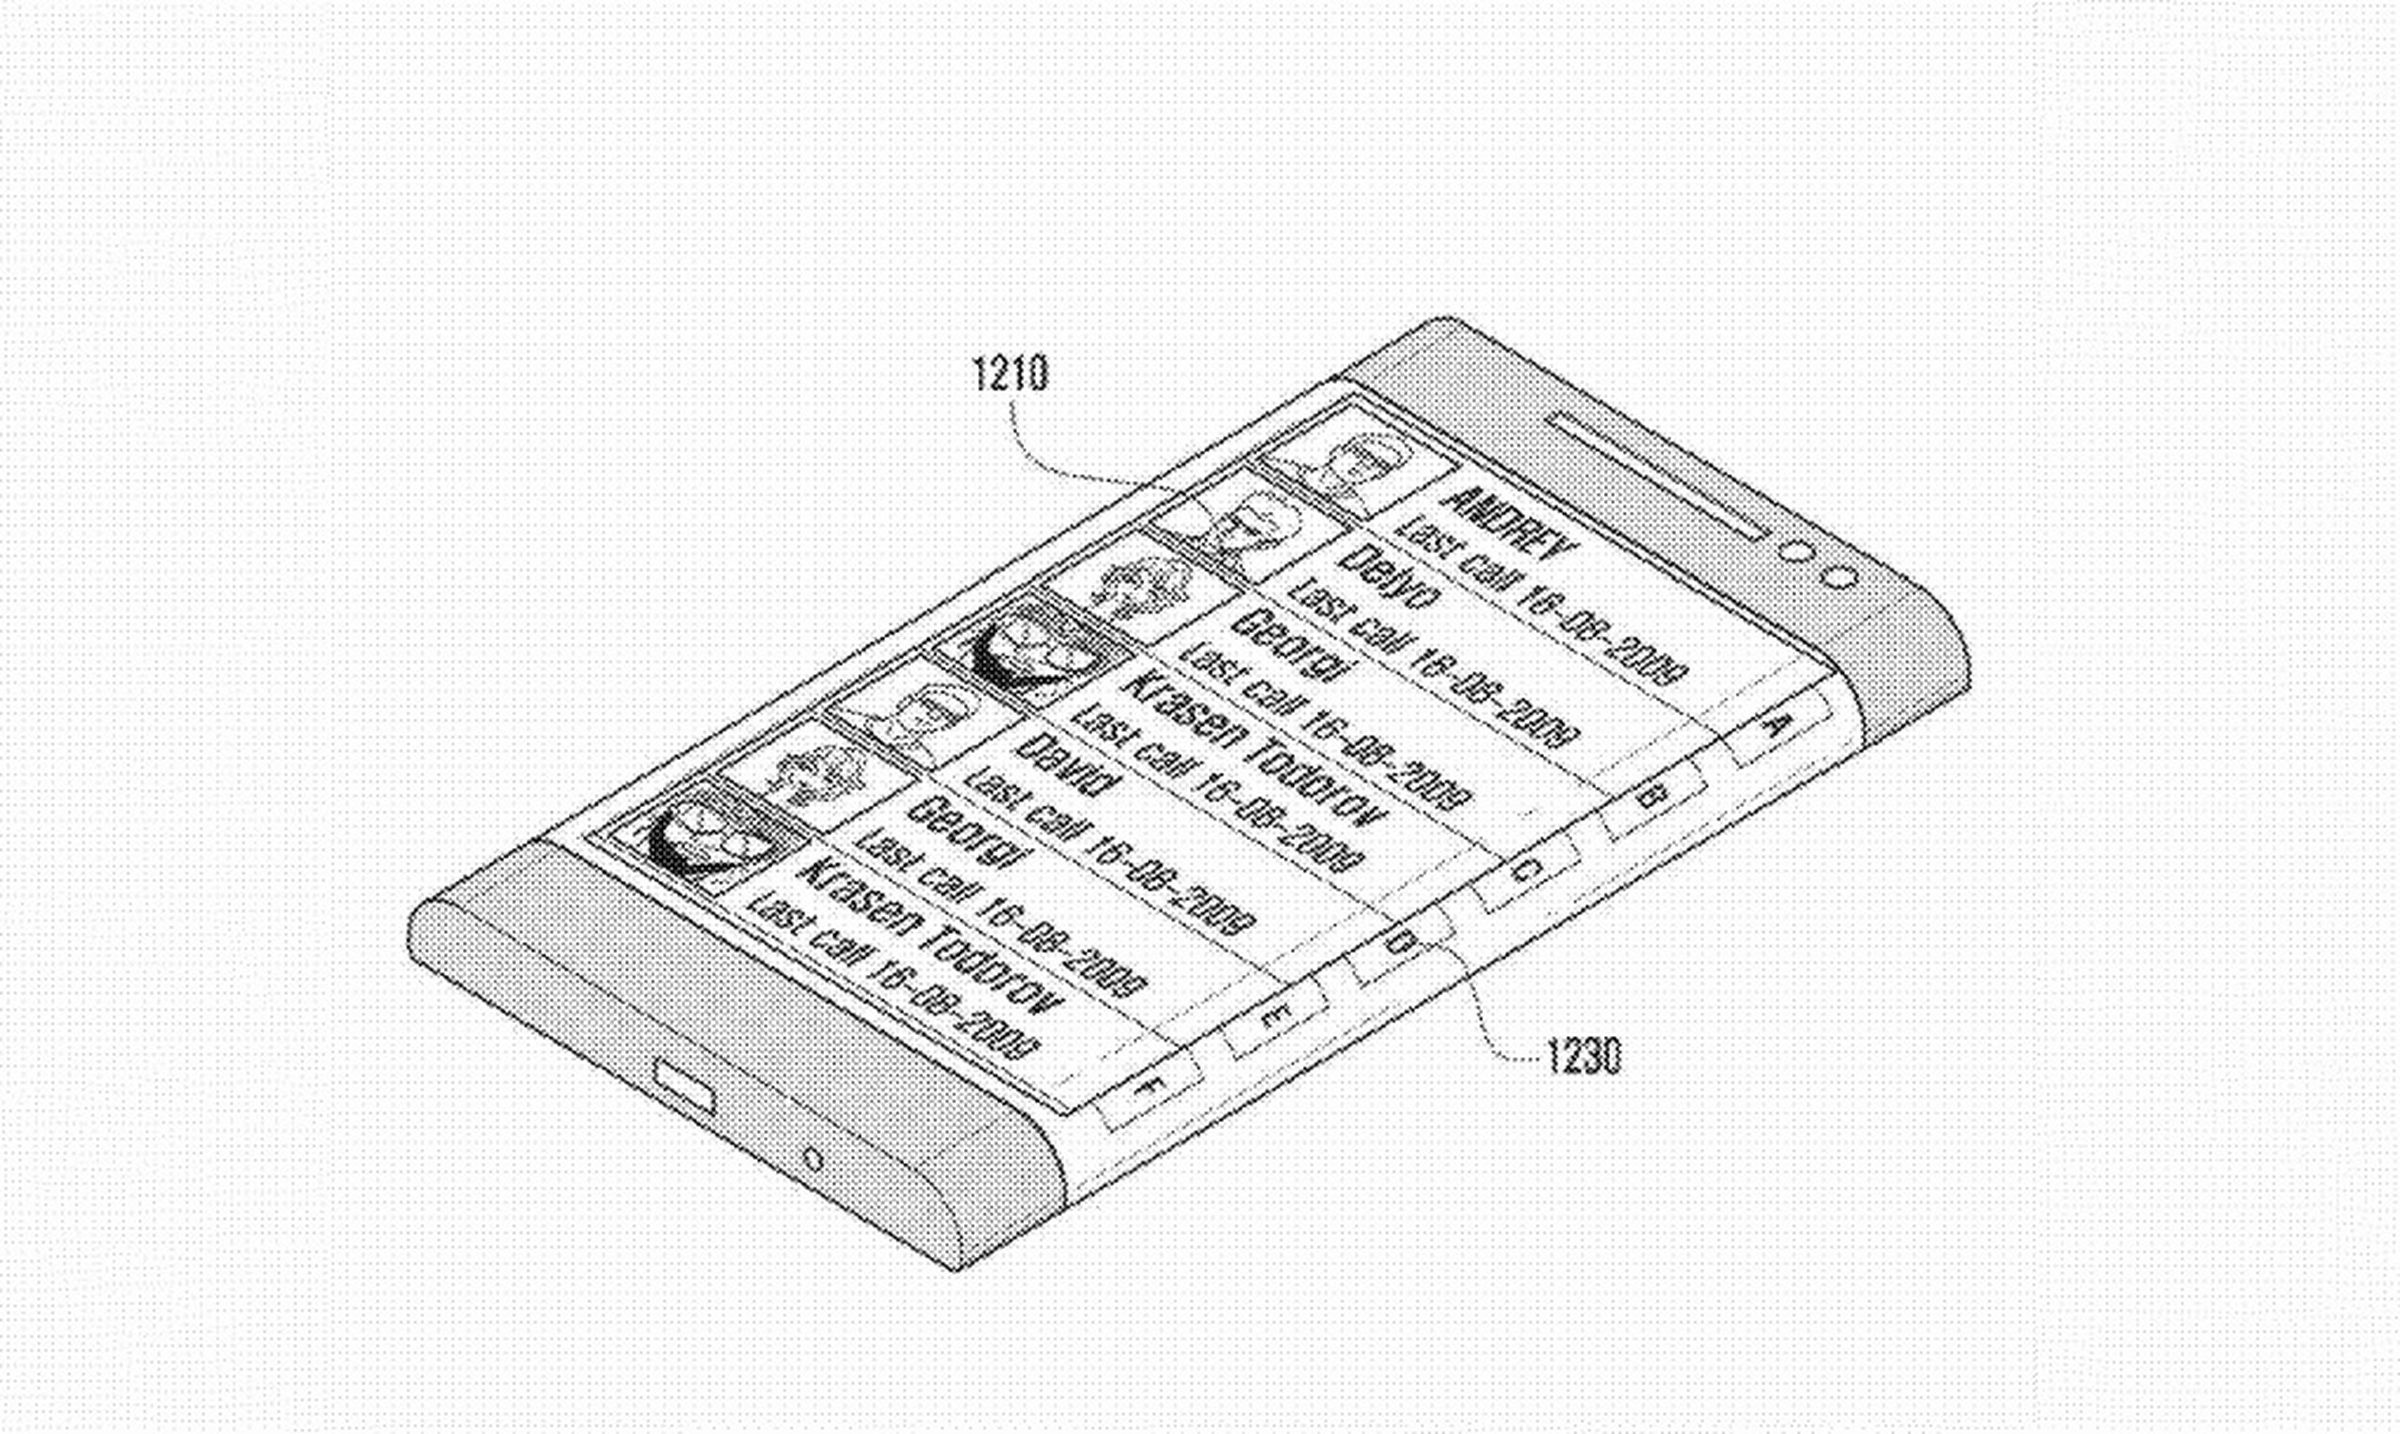 Samsung 'bended display' patent application